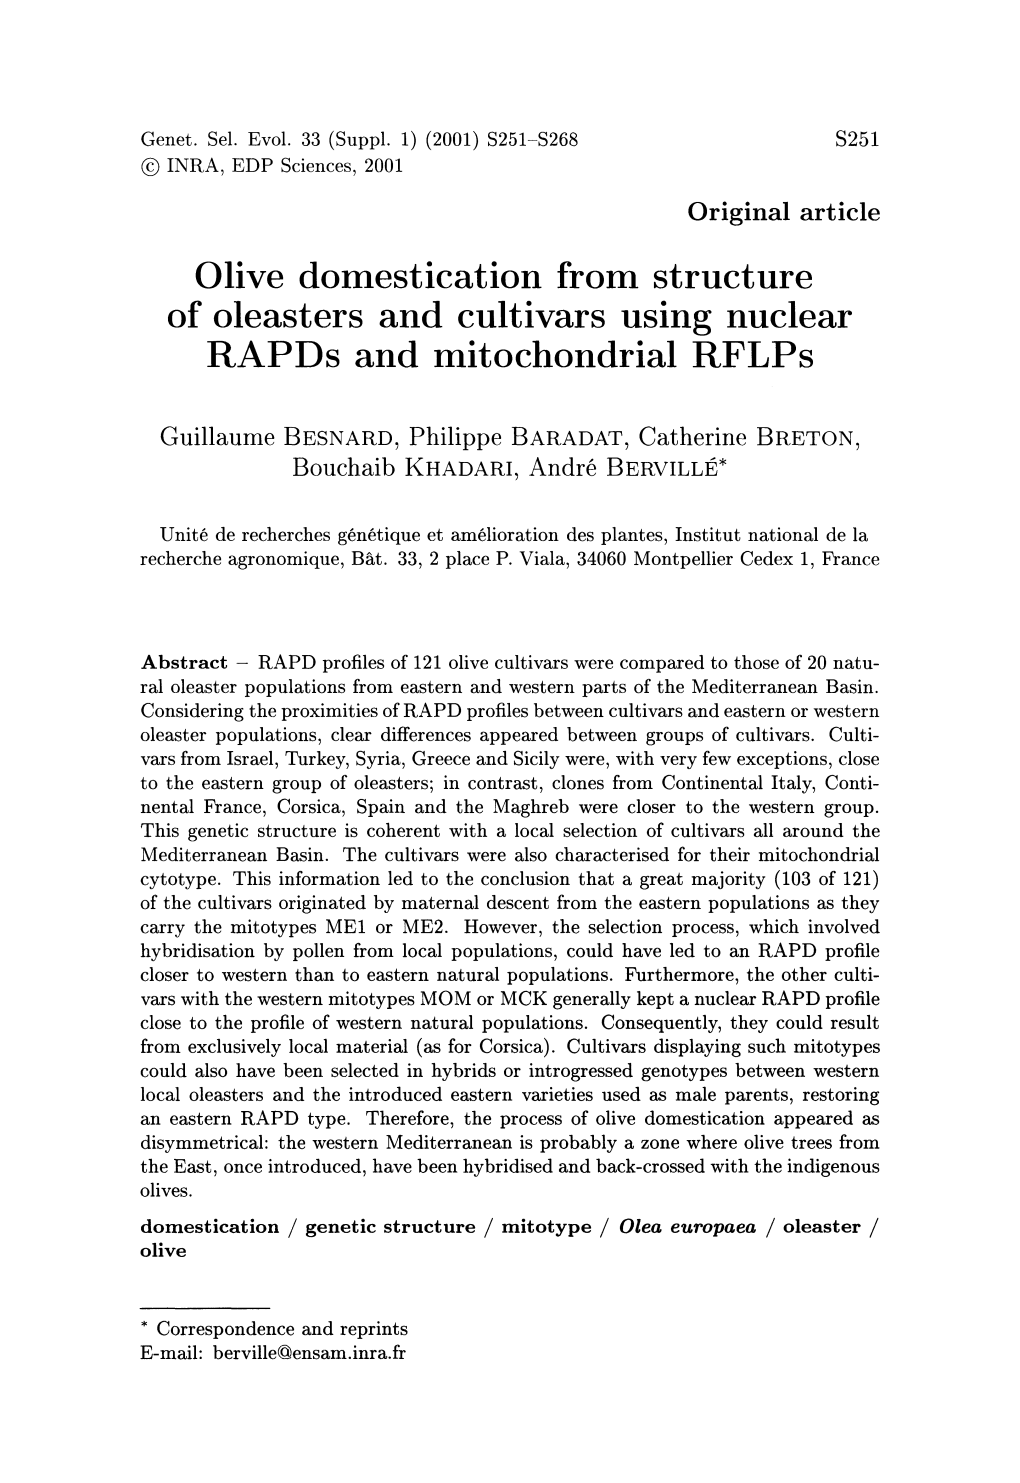 Olive Domestication from Structure of Oleasters and Cultivars Using Nuclear Rapds and Mitochondrial Rflps